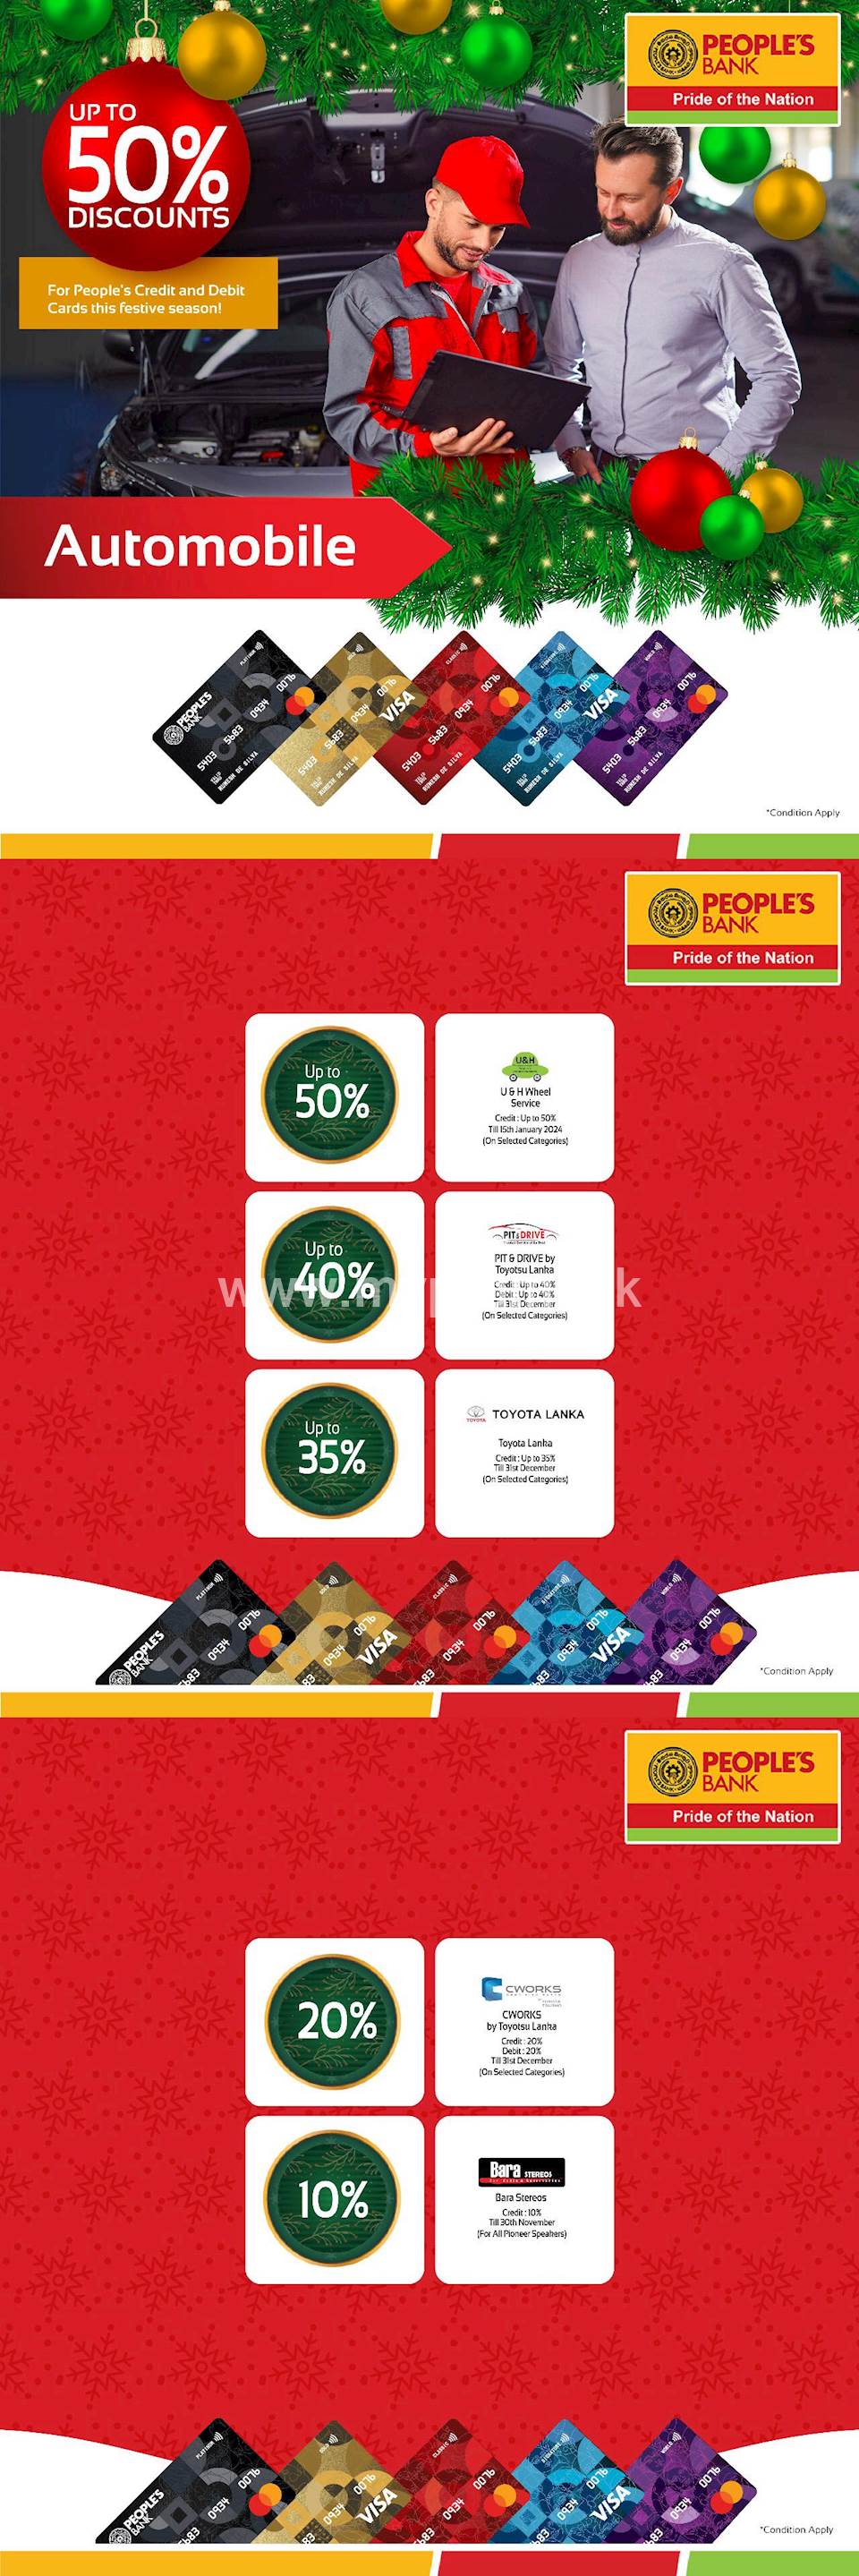 Up to 50% discounts on Automobile on your People’s Bank Credit or Debit Card